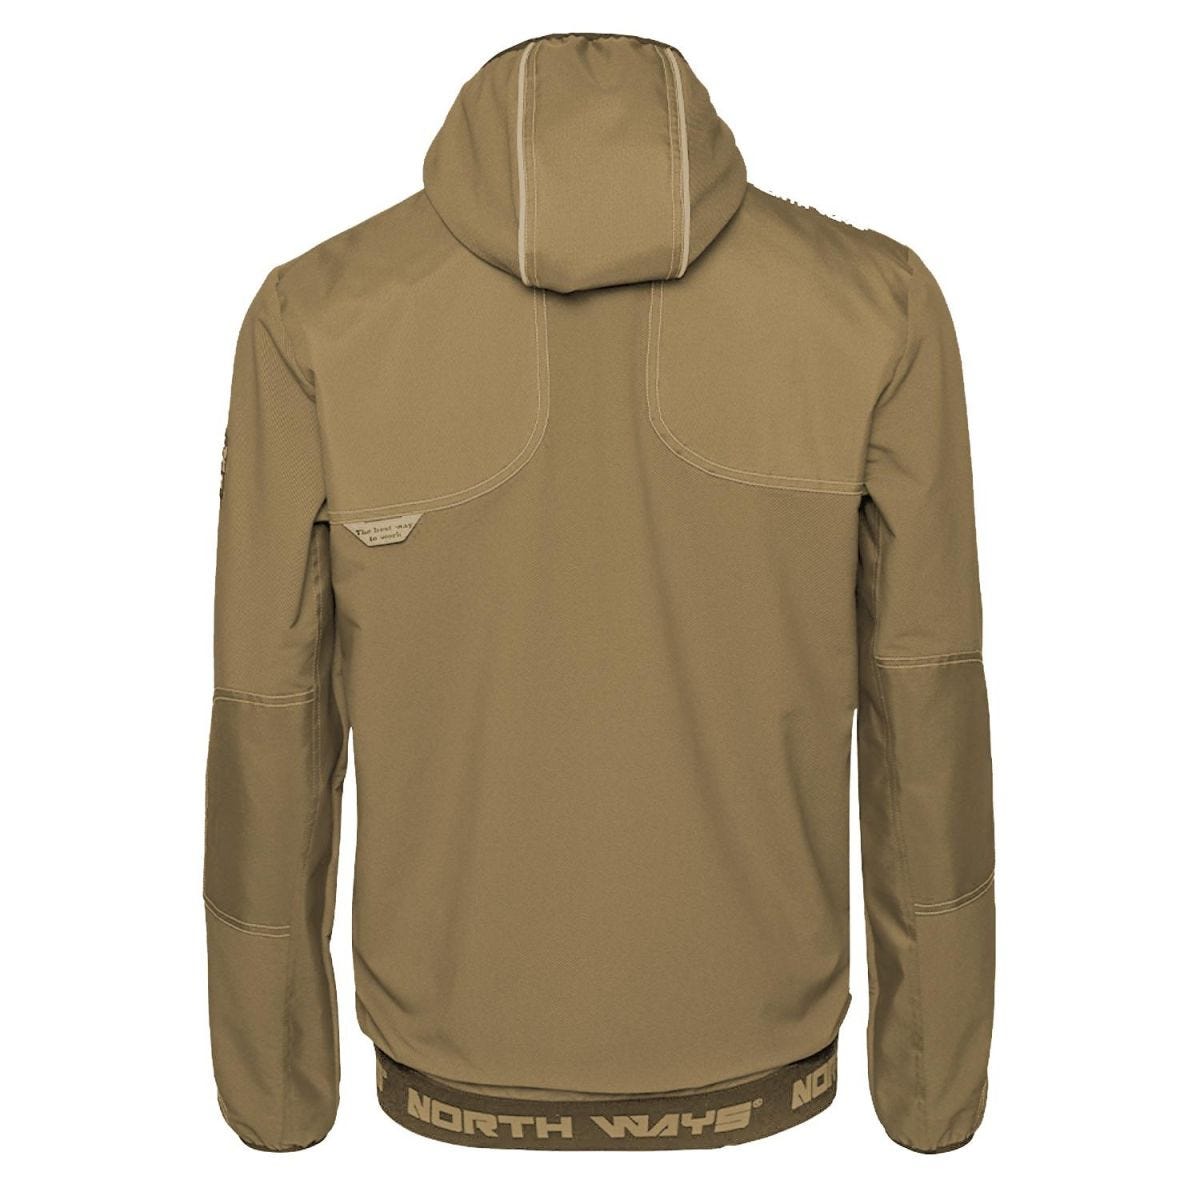 Blouson de travail multipoches Irons beige - North Ways - Taille L 2